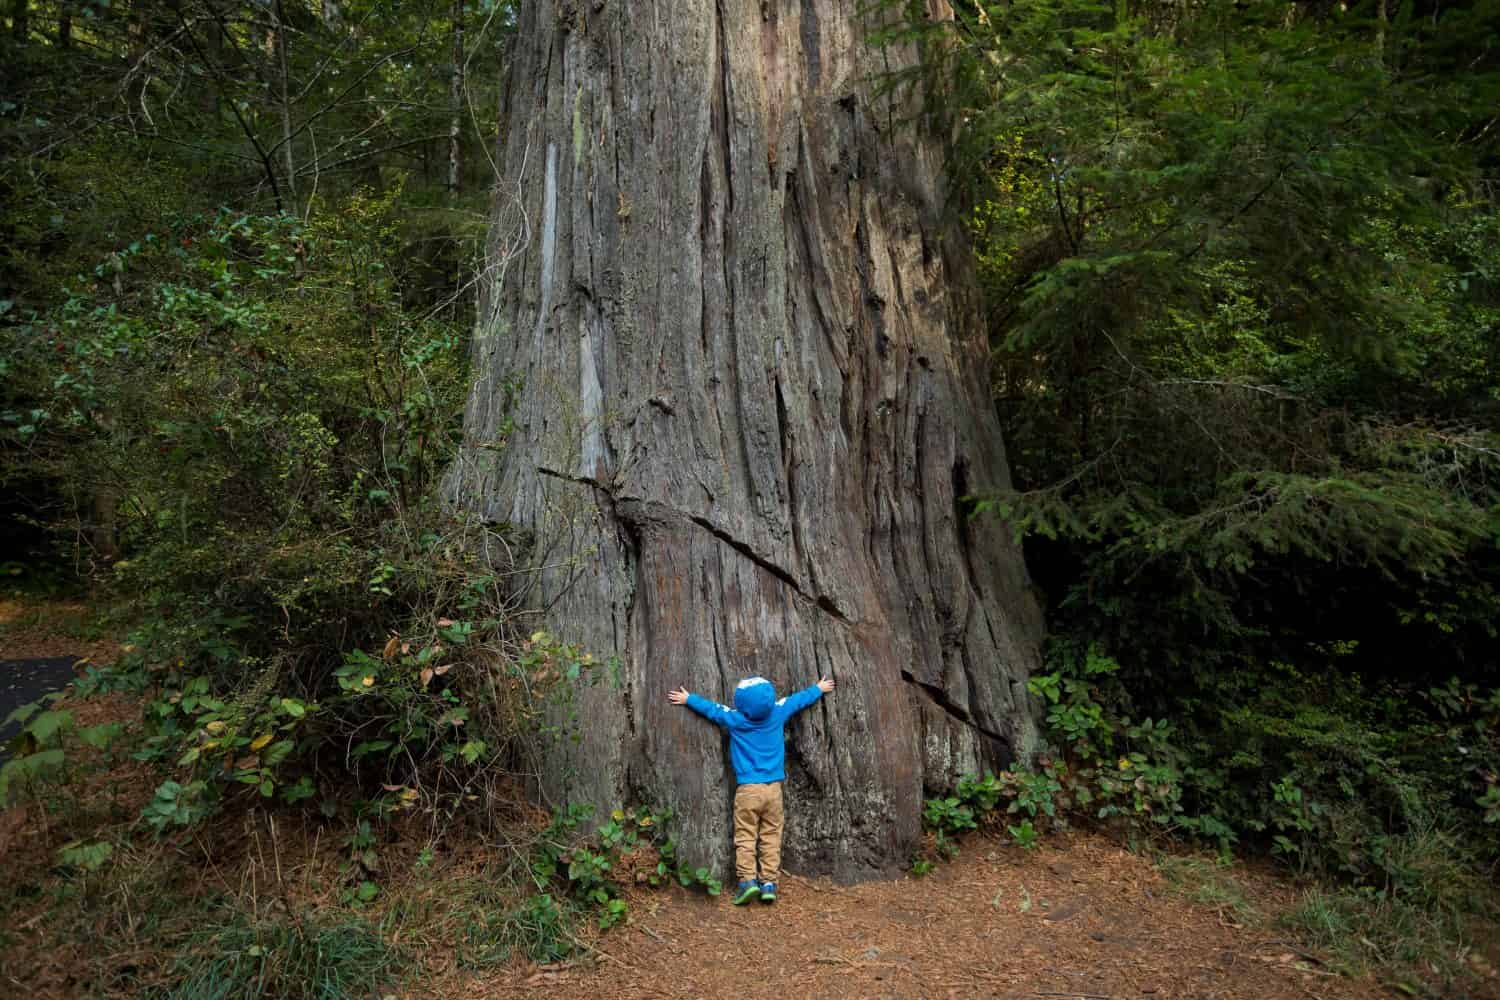 Young boy hugging a large tree along the Lady Bird Johnson Grove Trail in the California Redwoods National Park in coastal Northwest California.